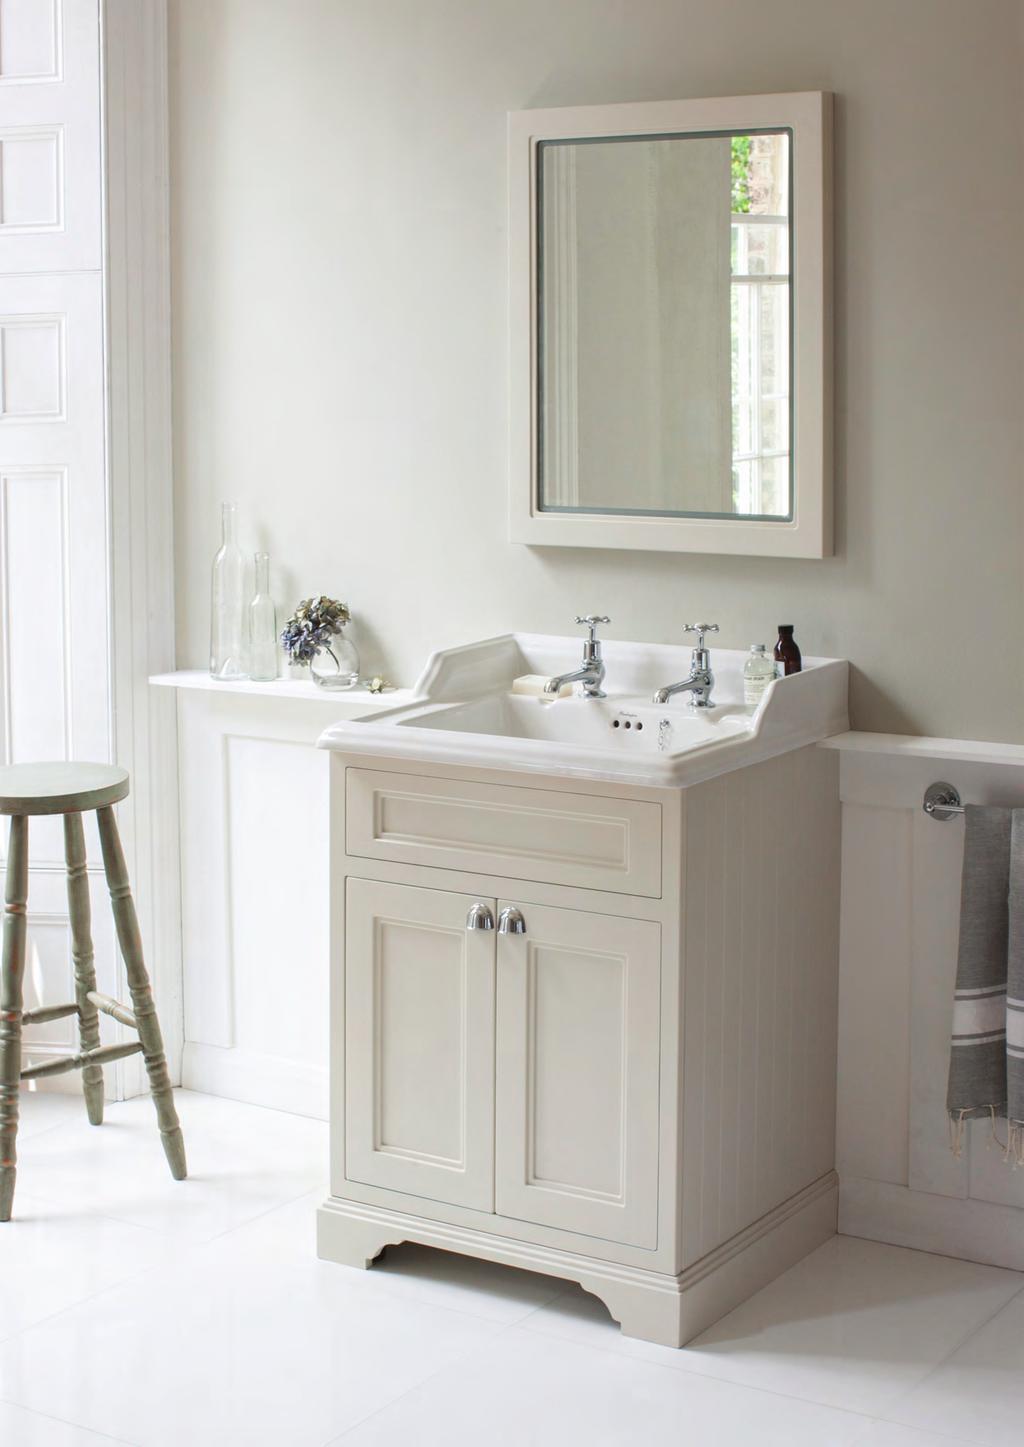 65 FREESTANDING FURNITURE 65 Freestanding The 65 free-standing furniture with your choice of basin is the perfect solution for those needing to save space but still require storage solutions for